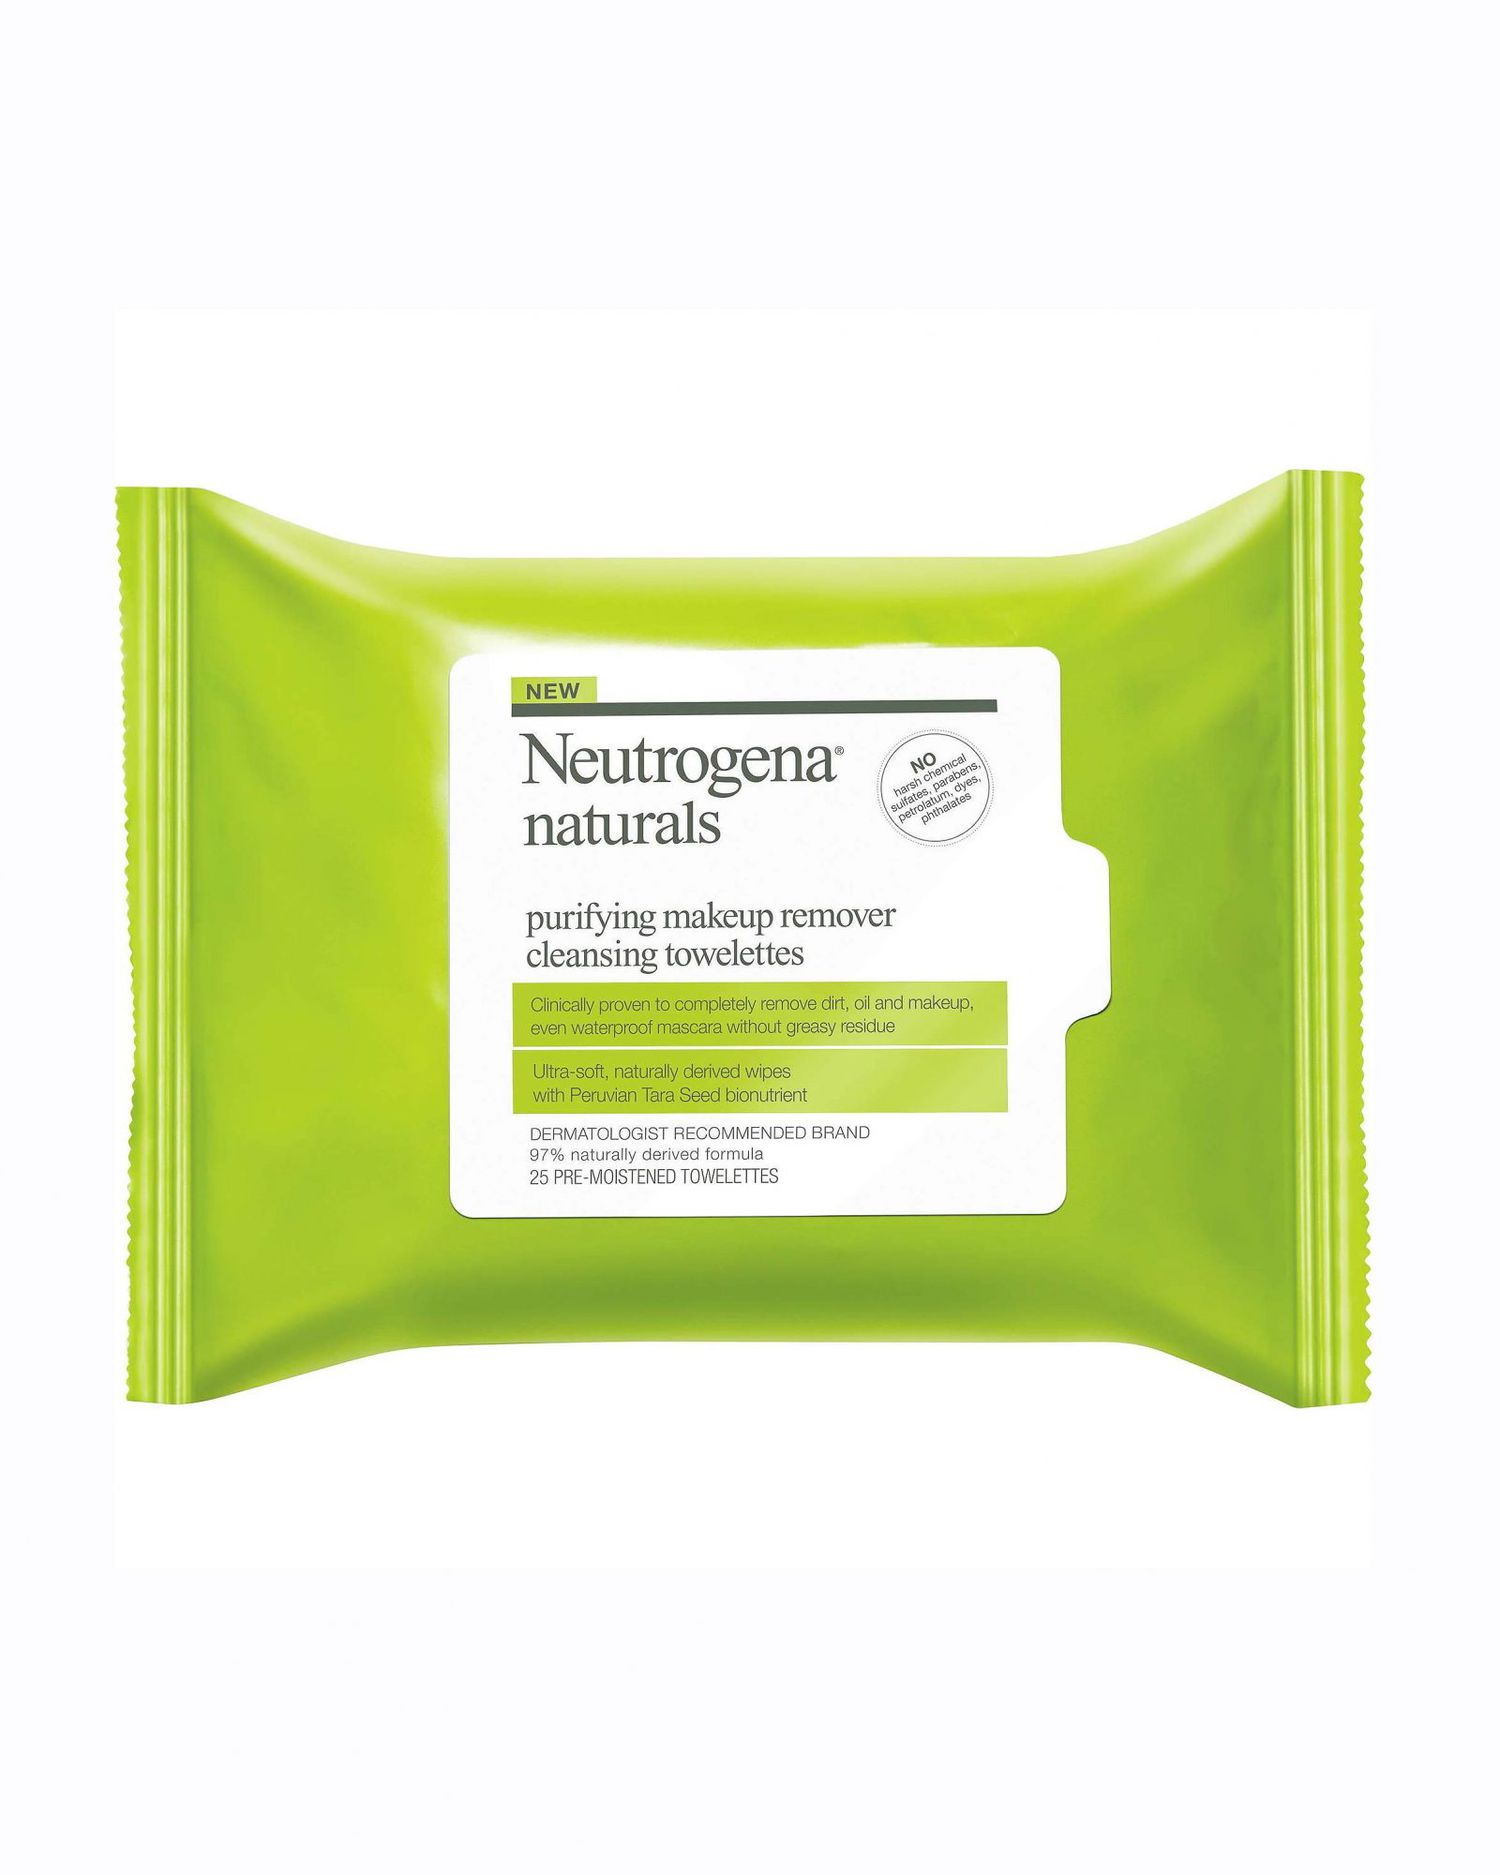 big-day-beauty-awards-neutrogena-naturals-cleansing-towelettes-0216.jpg